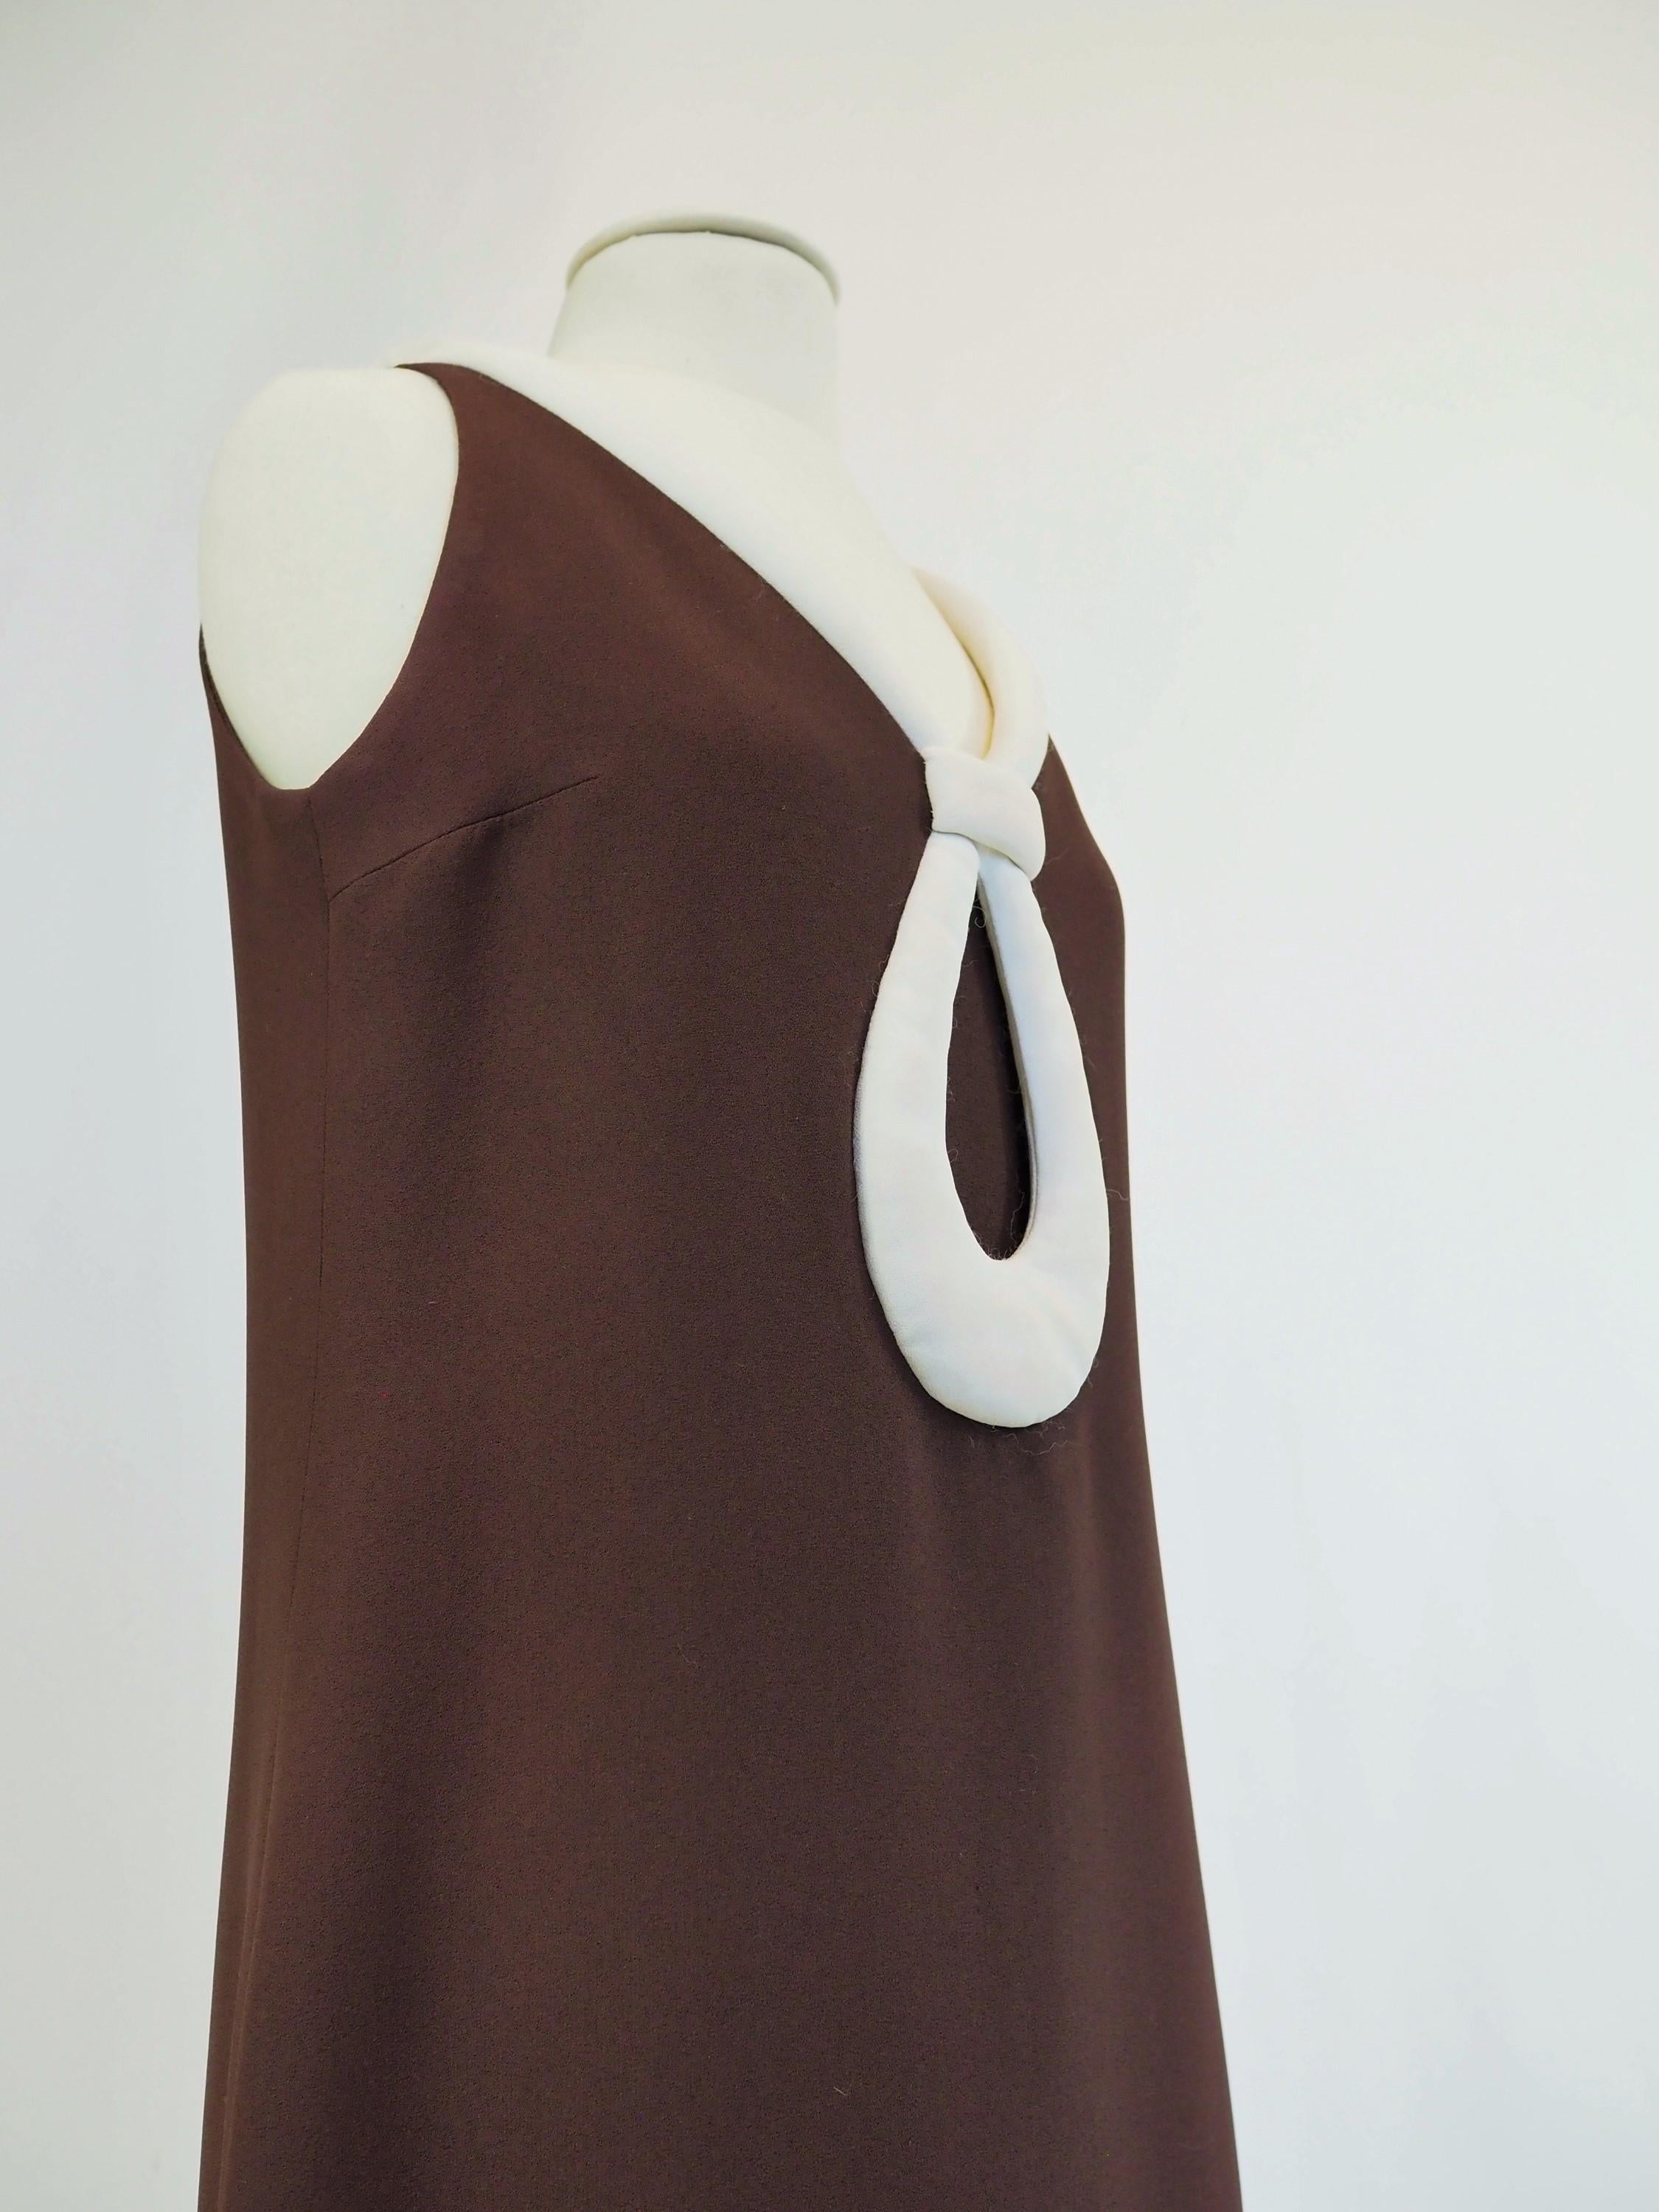 A Space Age Pierre Cardin Dress in chocolate jersey Circa 1970/1975 For Sale 11